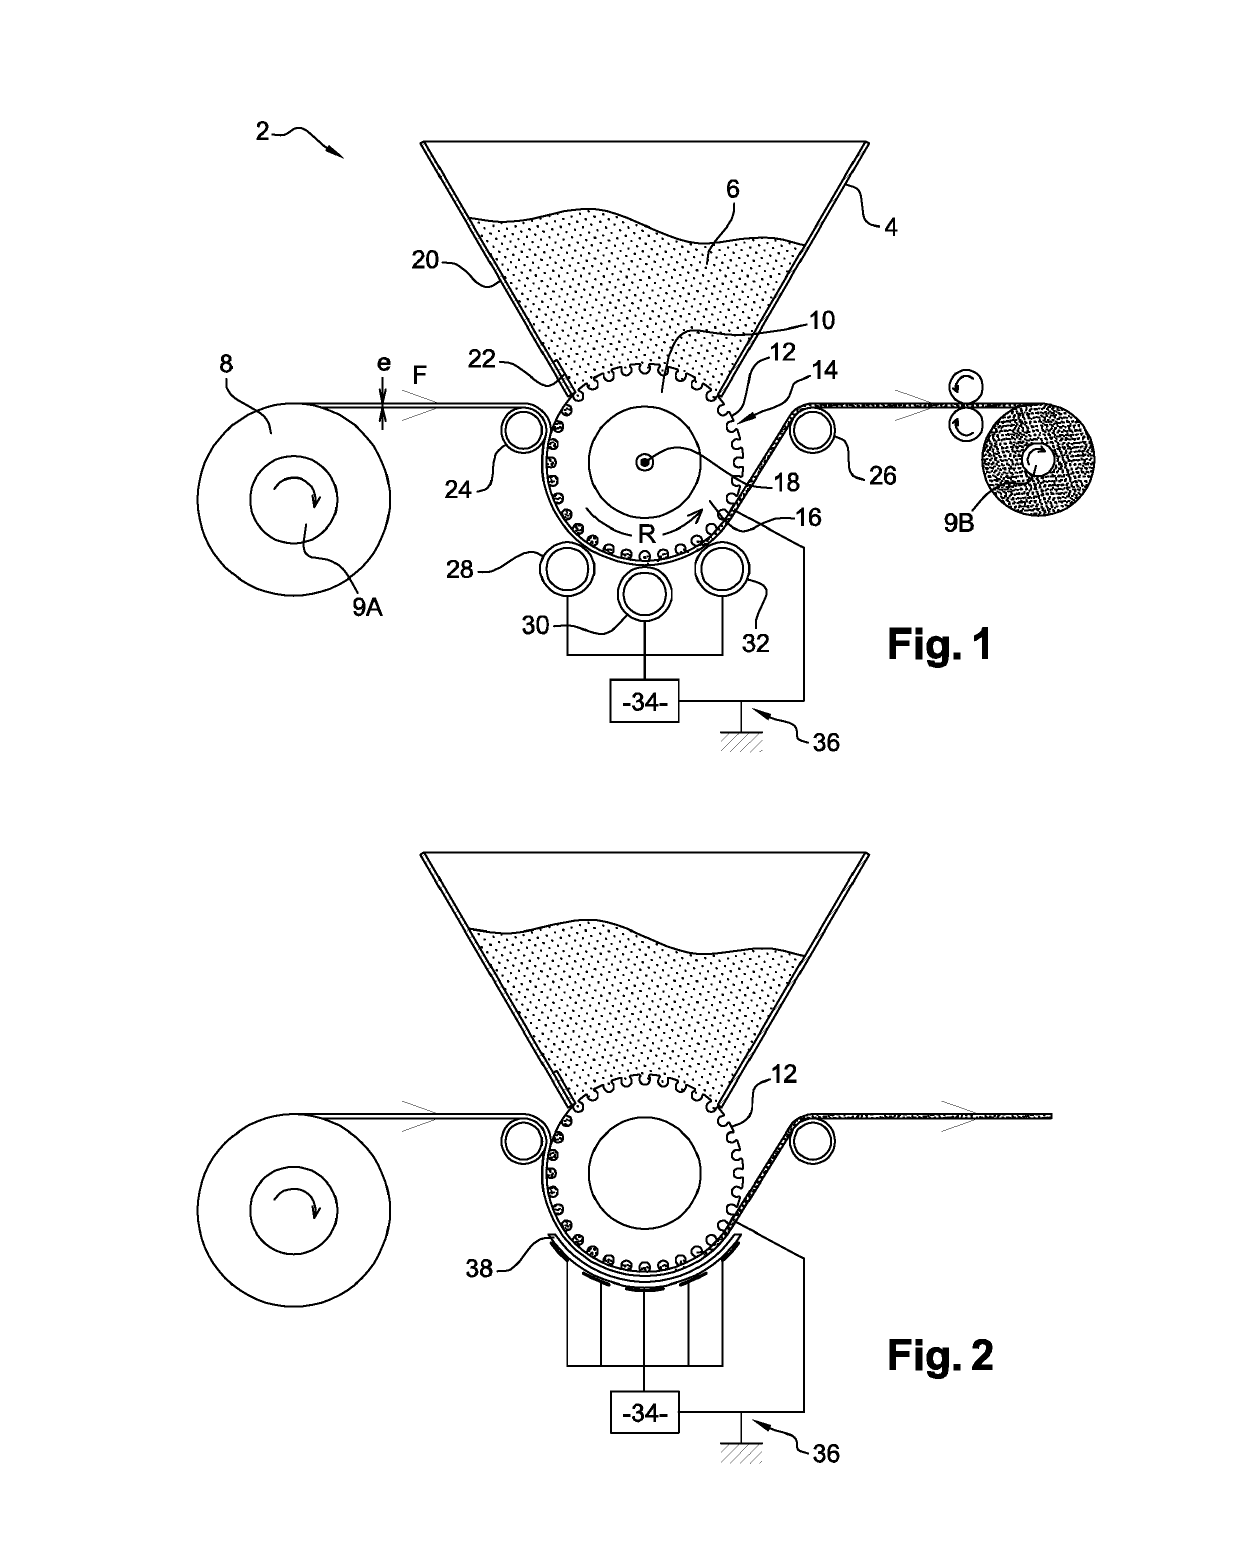 Apparatus and method for impregnation by transferring a powder into a porous substrate